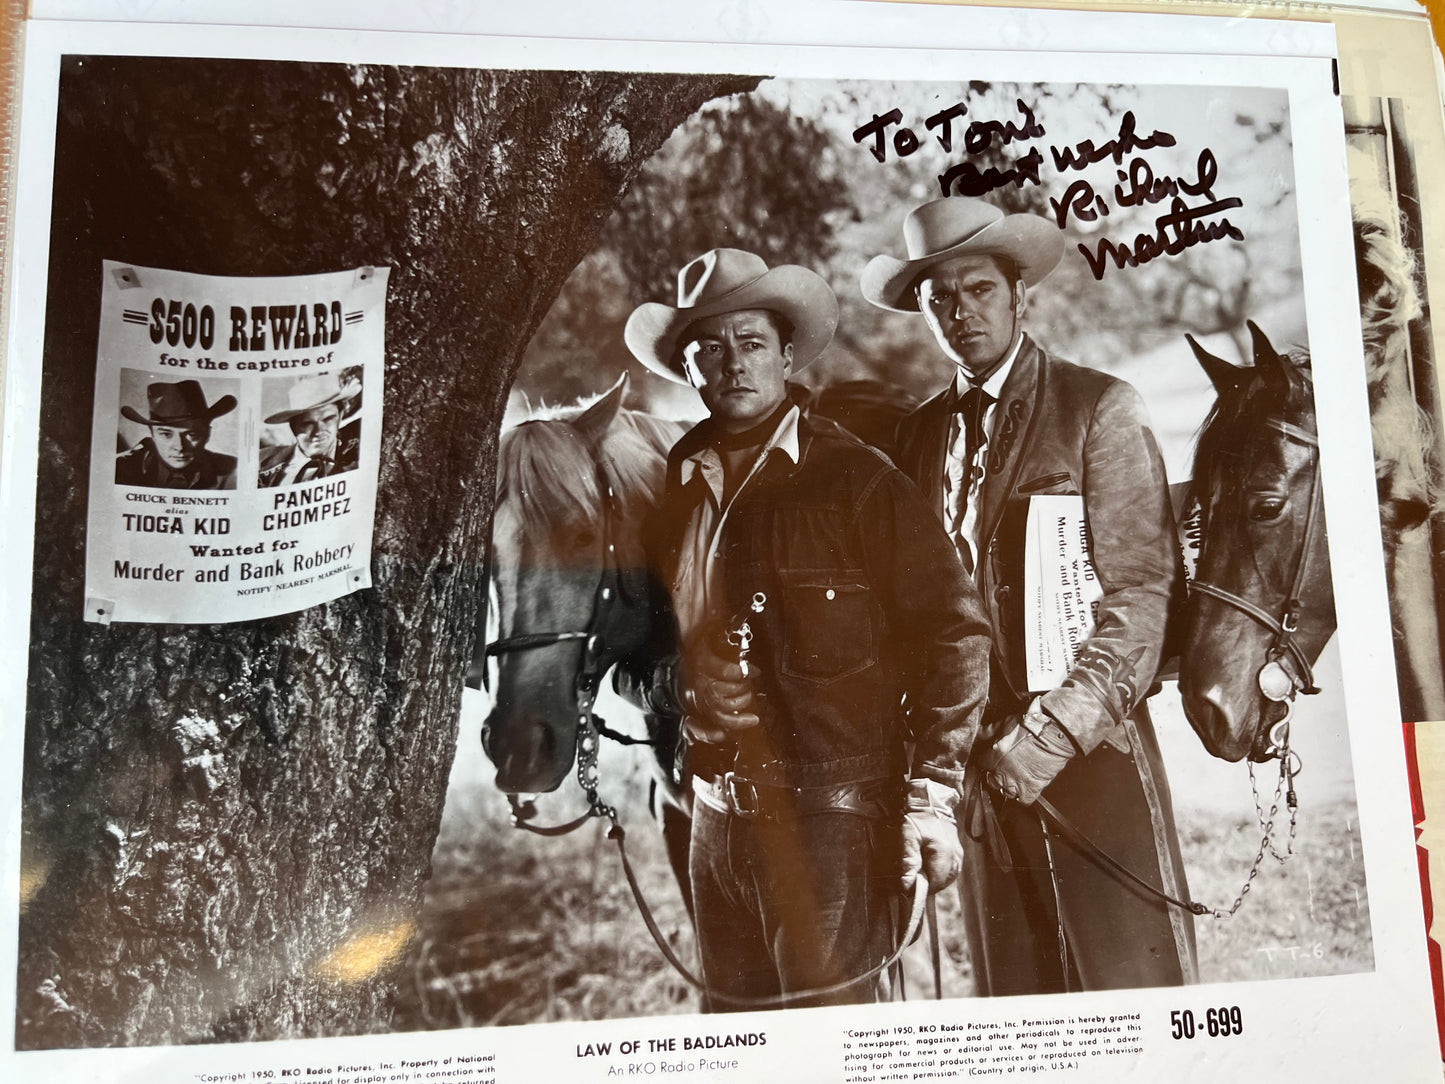 RICHARD MARTIN, Law of the Badlands (1950), autograph